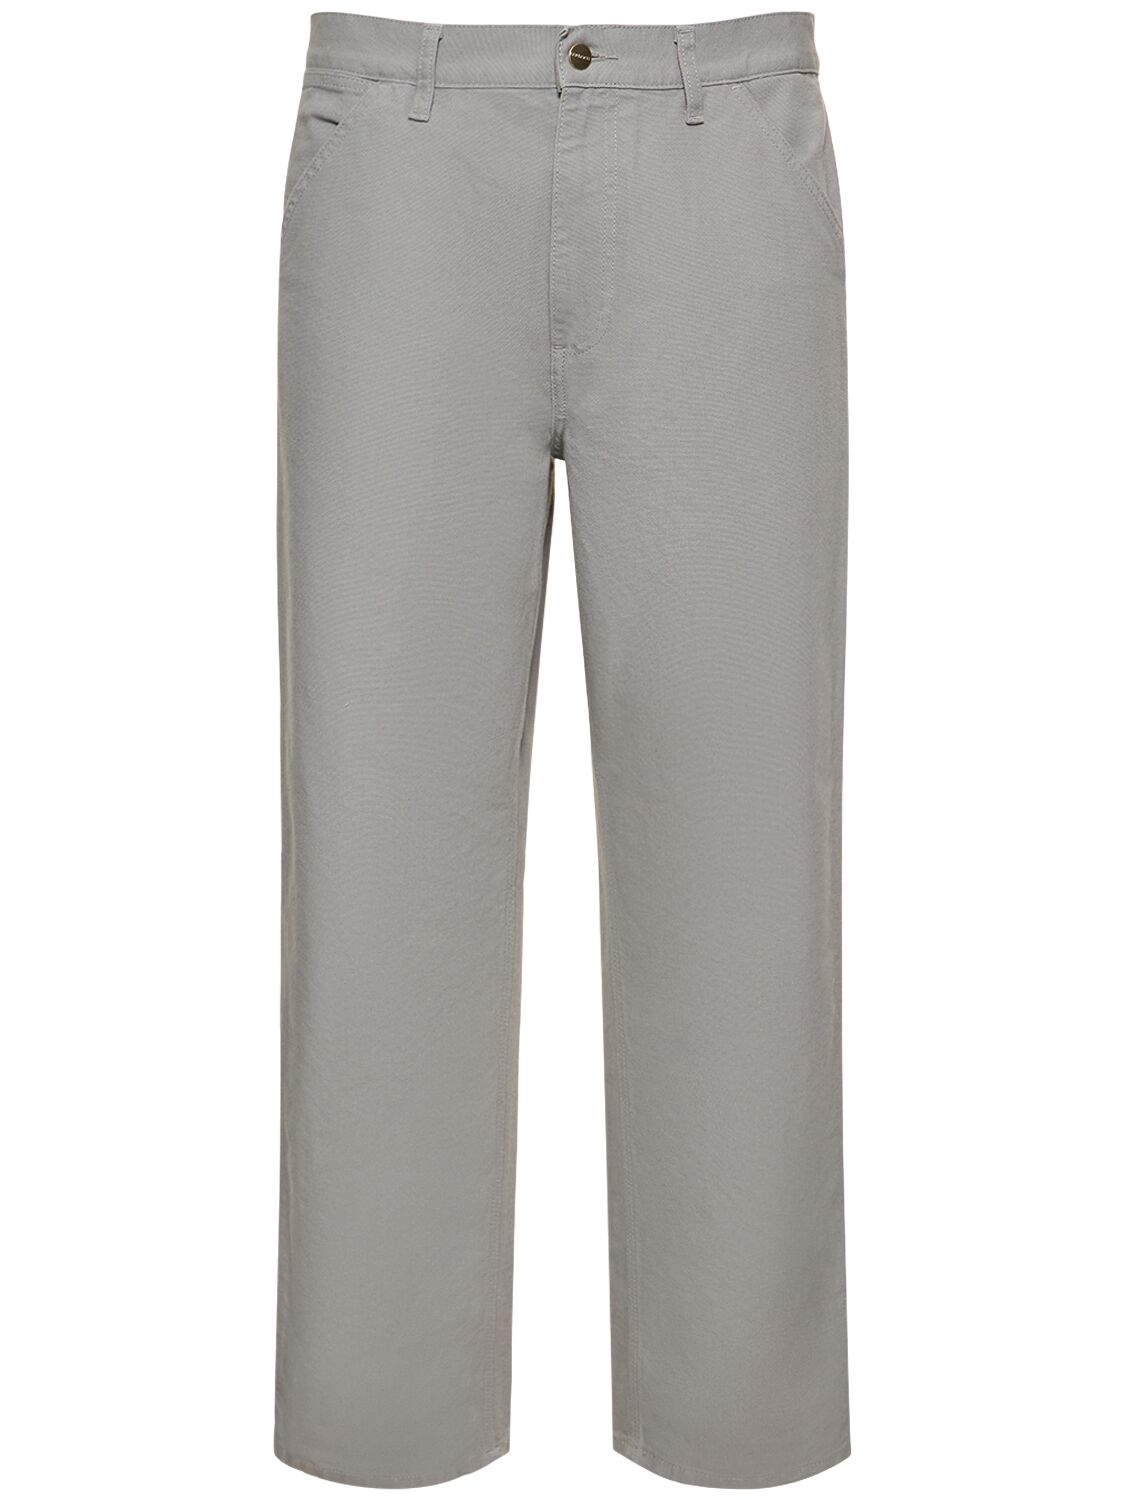 Single-knee Relaxed Straight Fit Pants – MEN > CLOTHING > PANTS